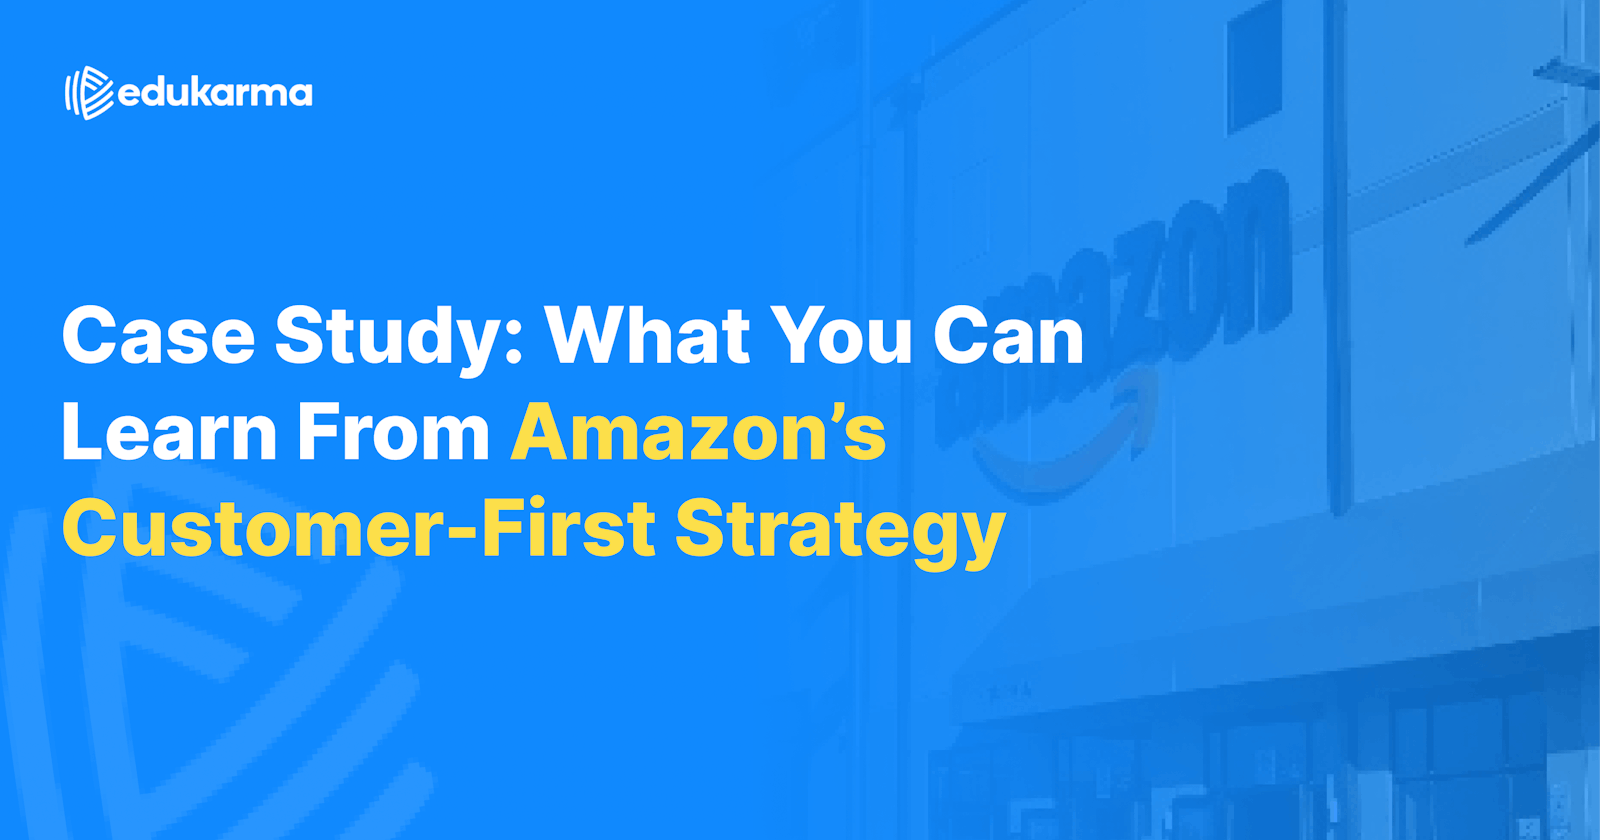 Case Study: What You Can Learn From Amazon's Customer-First Strategy